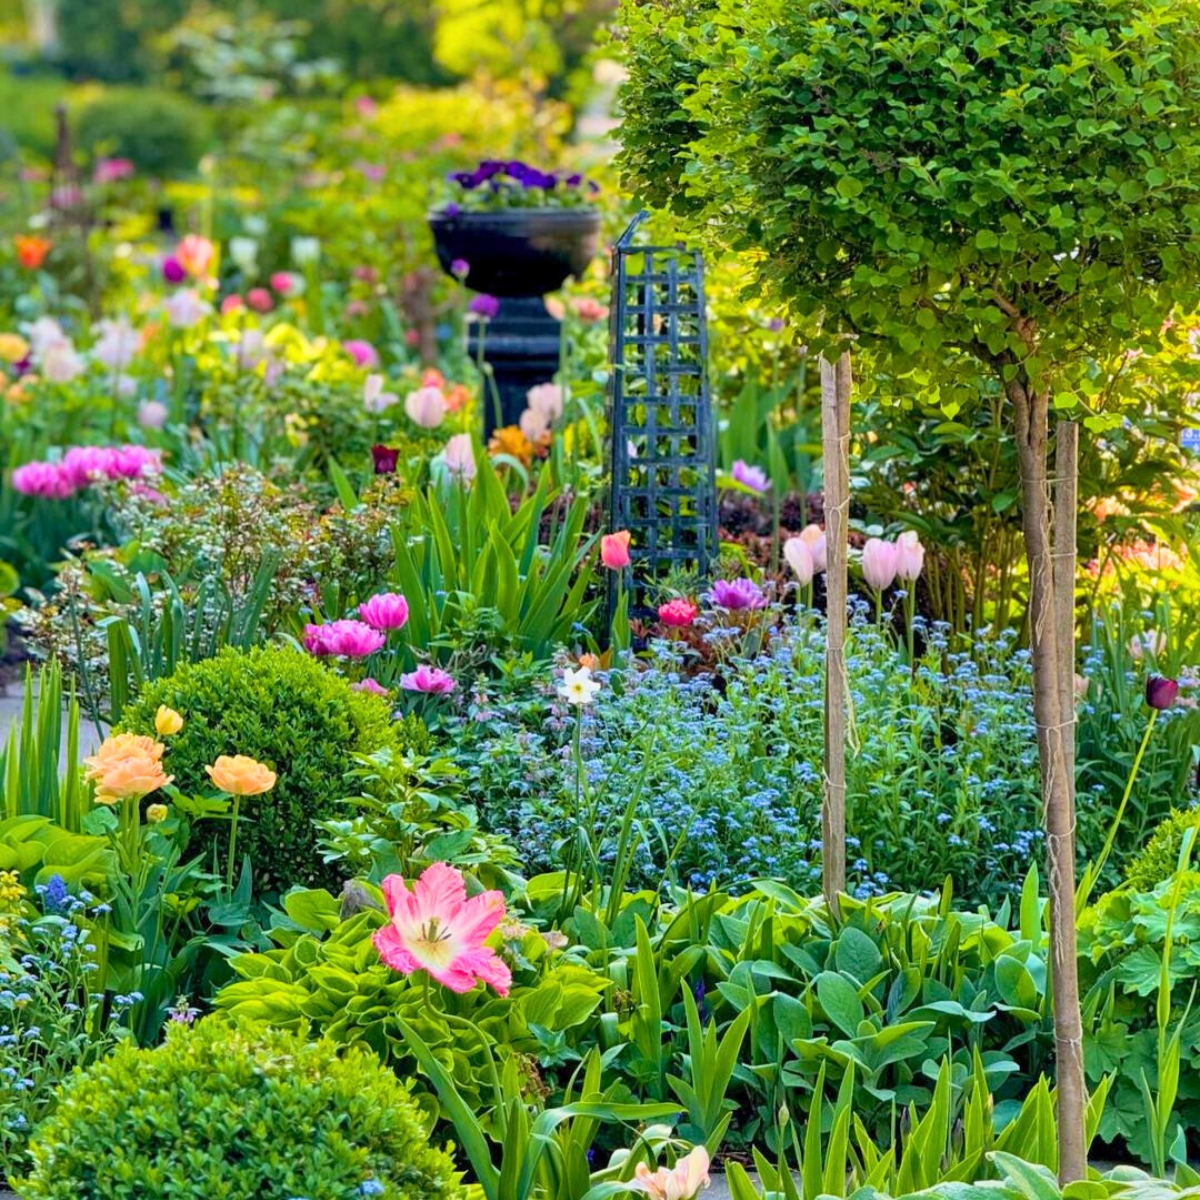 Beautifying gardens with flowers